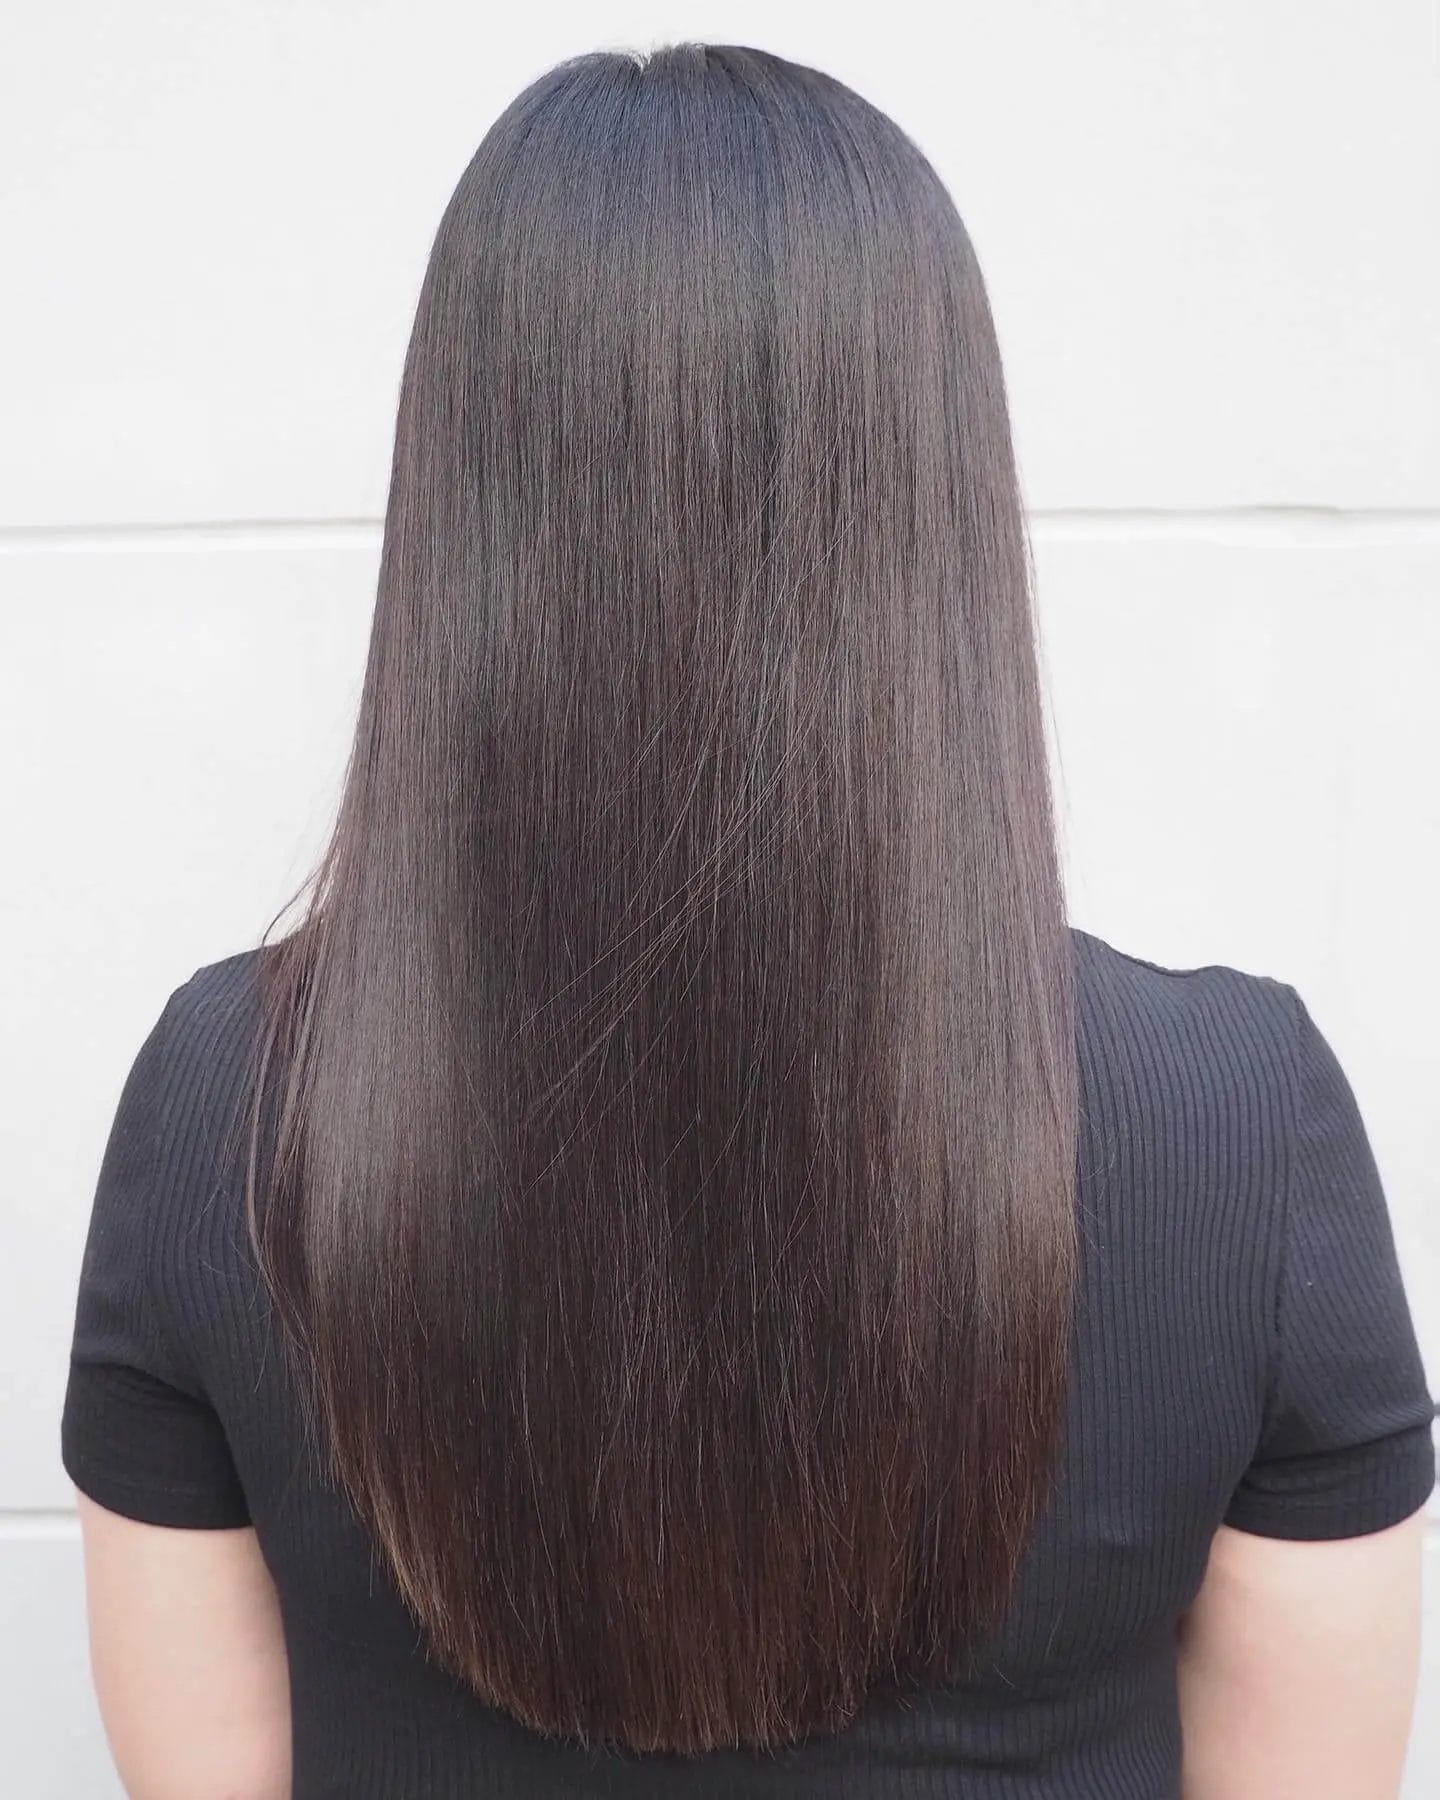 U-shaped hair transitioning from ash-brown to chestnut with a silky gradient effect.
